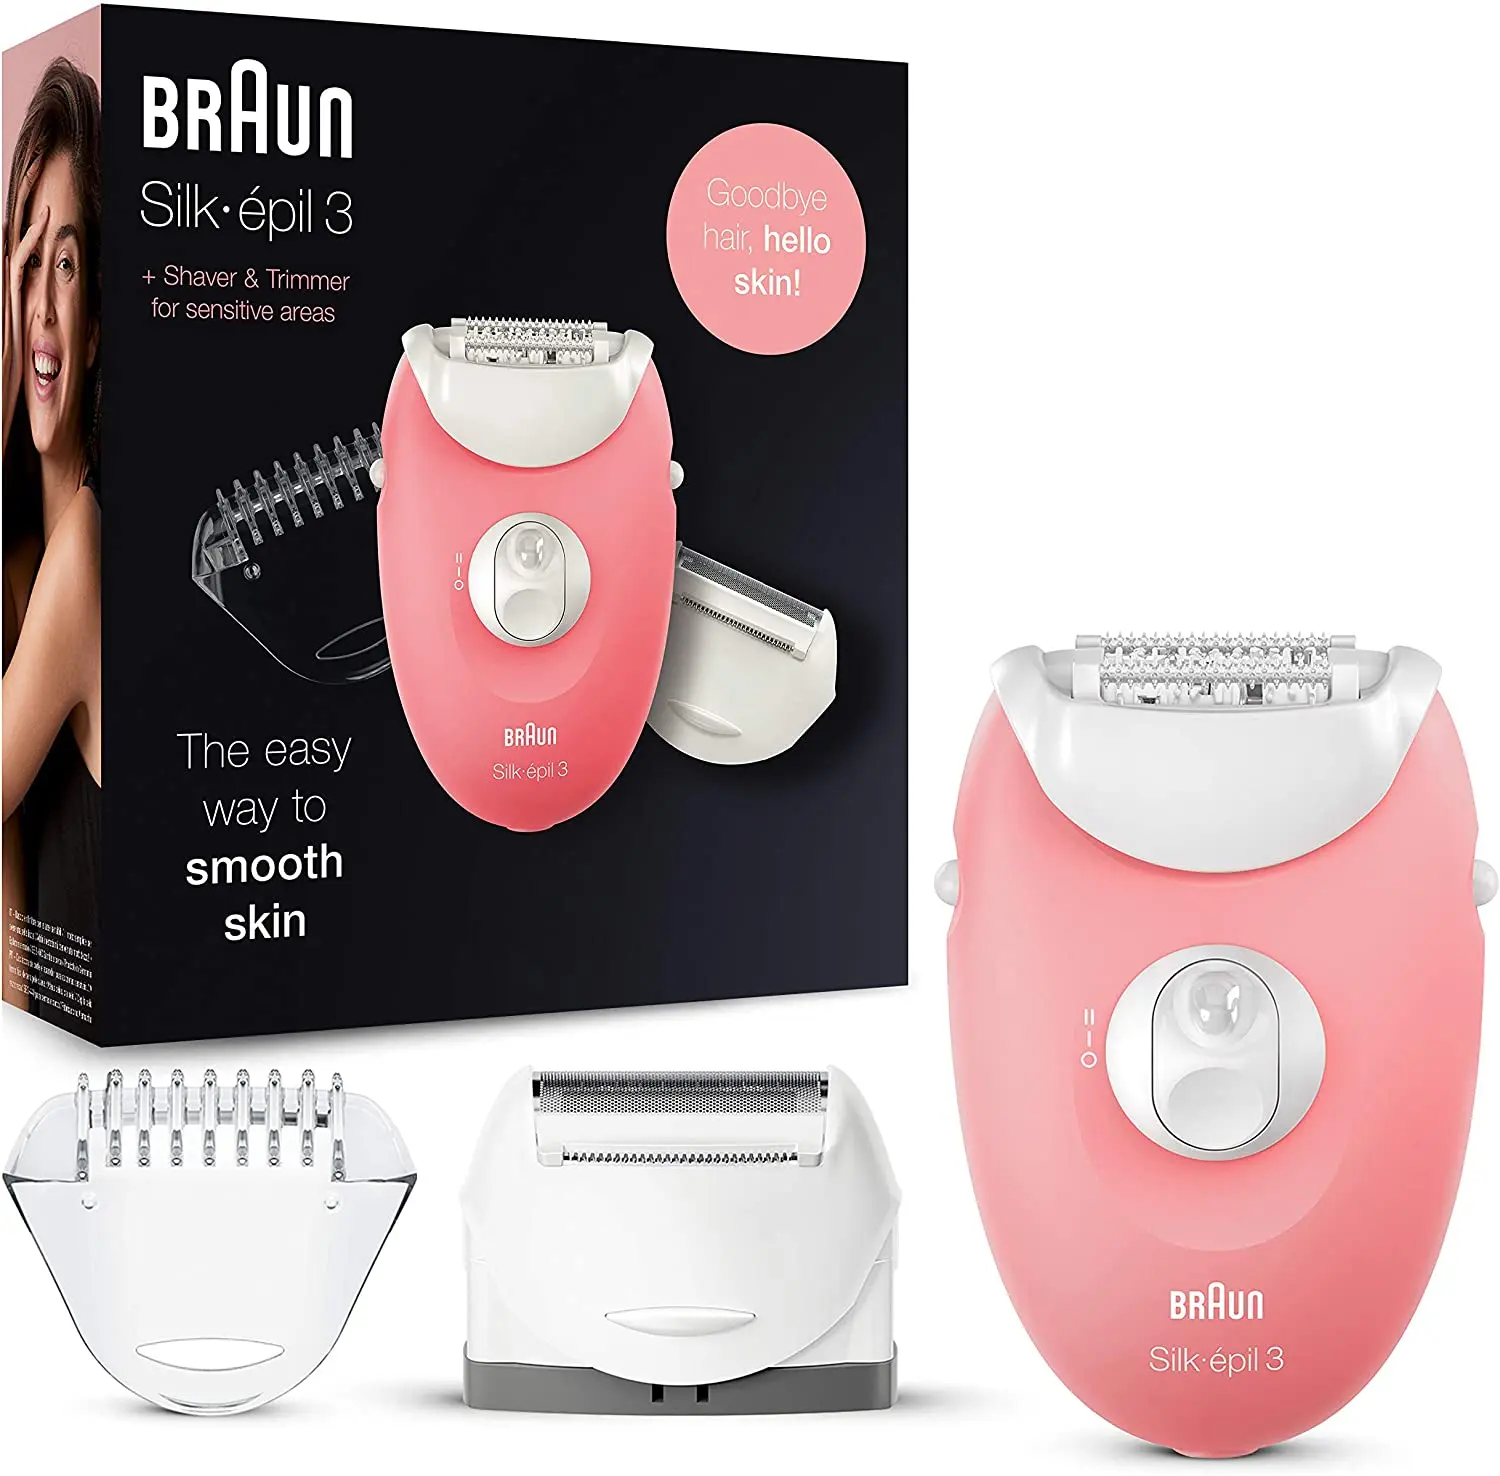 Braun 3440 Silk-Epil 3 Cord Dry Use Epilator with 2 Additional Heads, White and Pink